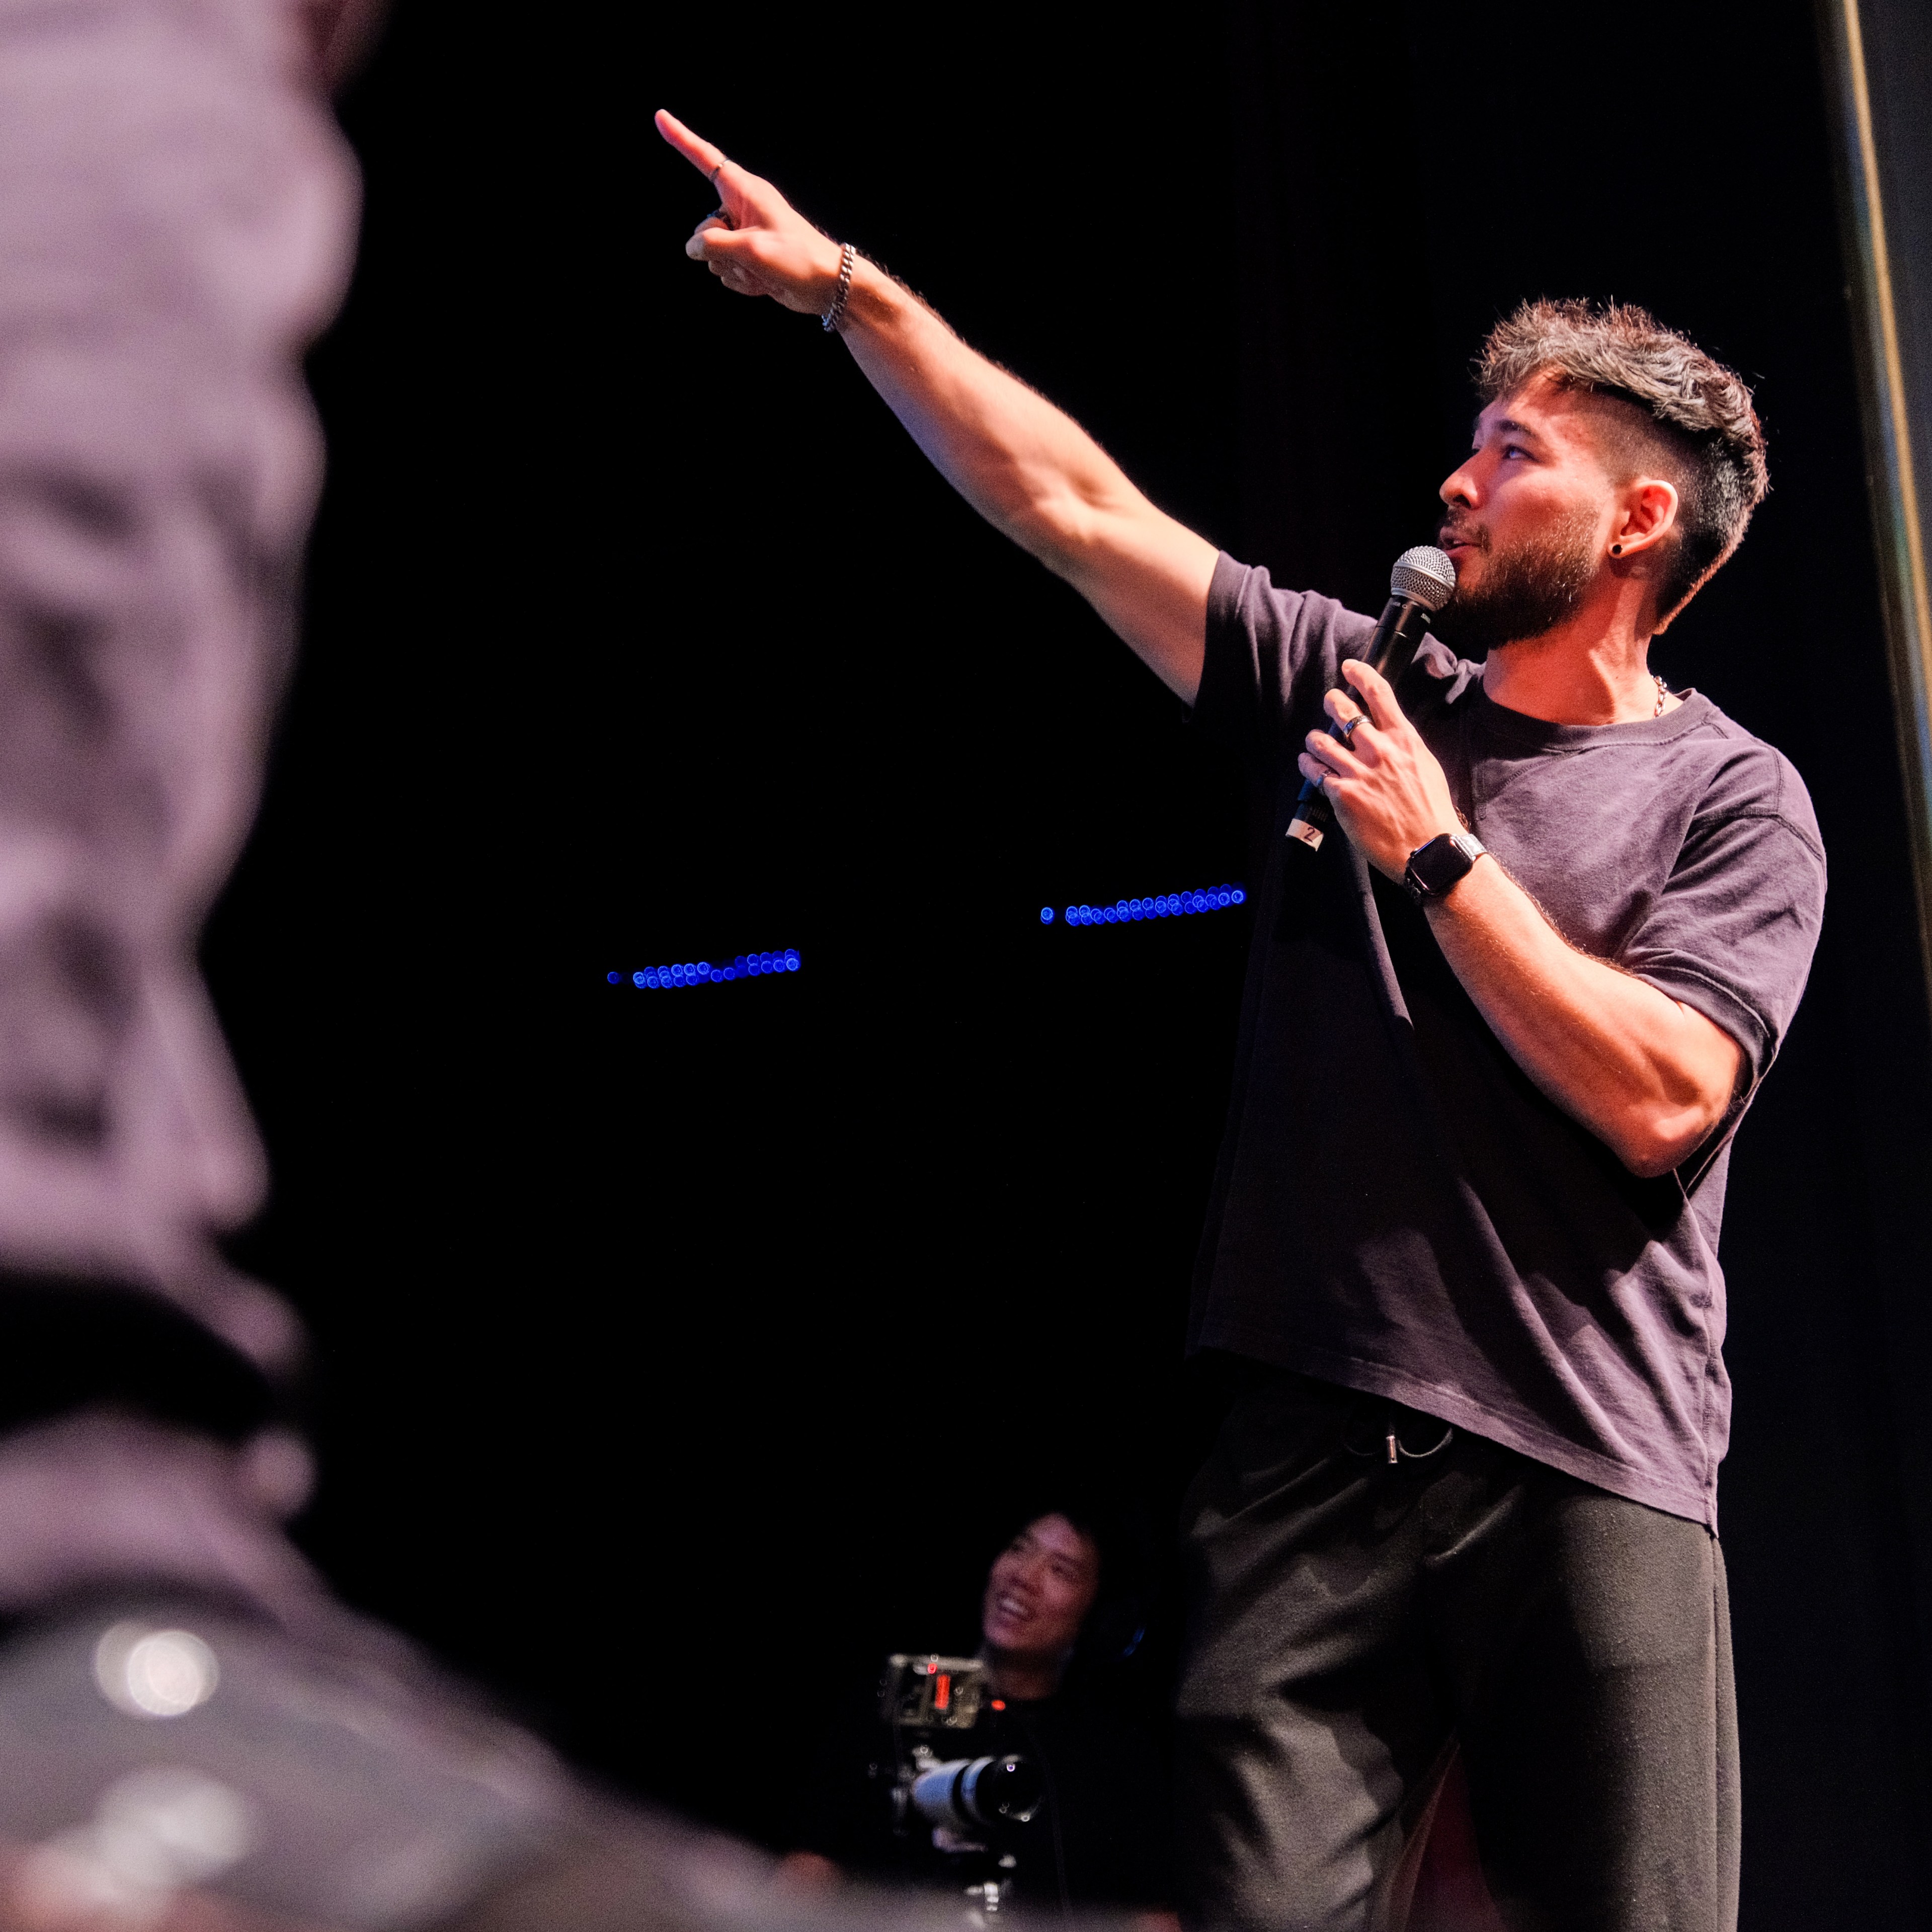 A man with a beard and short hair is holding a microphone and pointing to the sky while speaking on stage, with a camera operator smiling in the background.